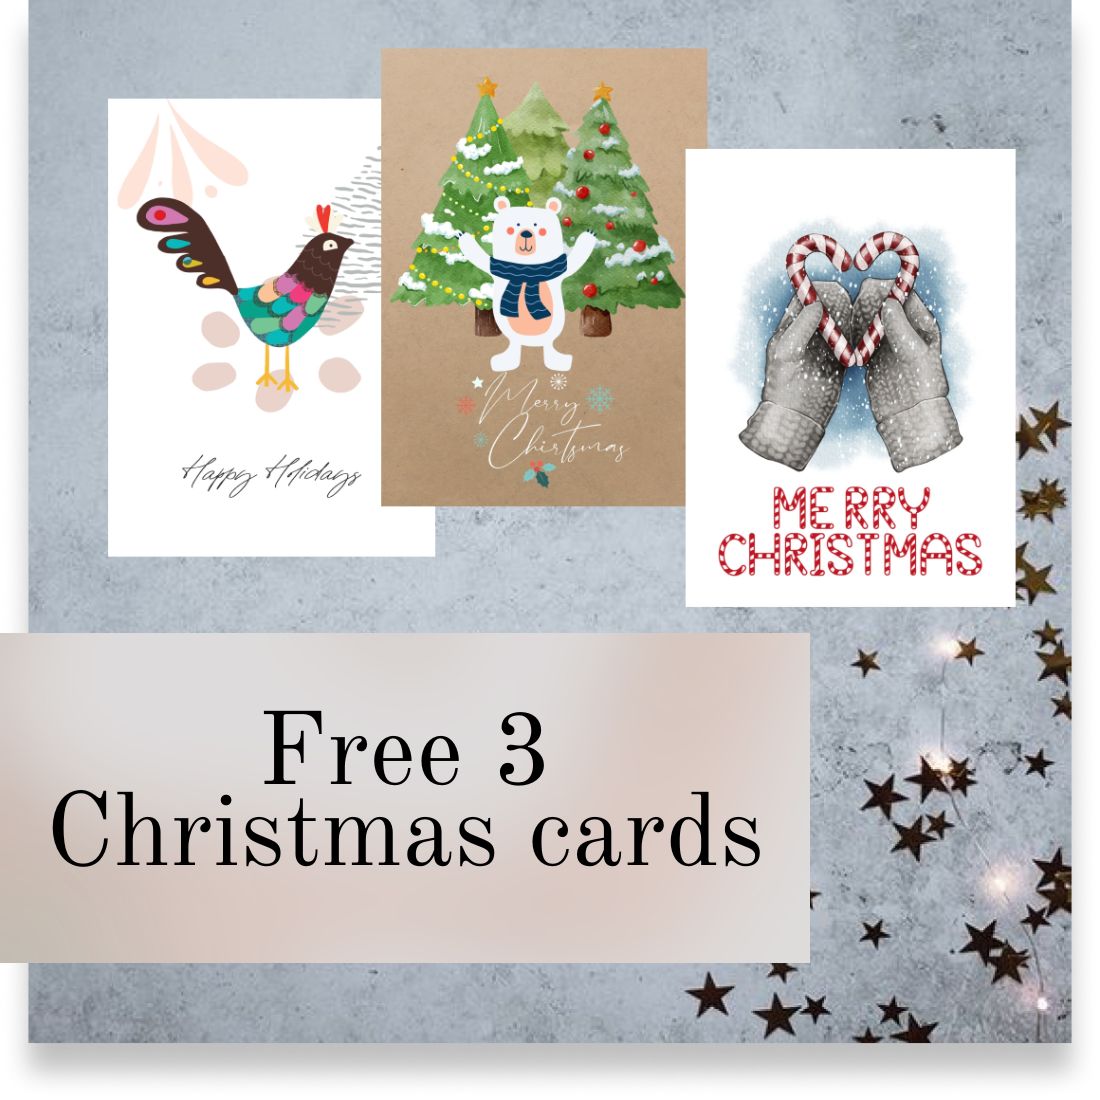 Free Christmas Cards Design cover image.